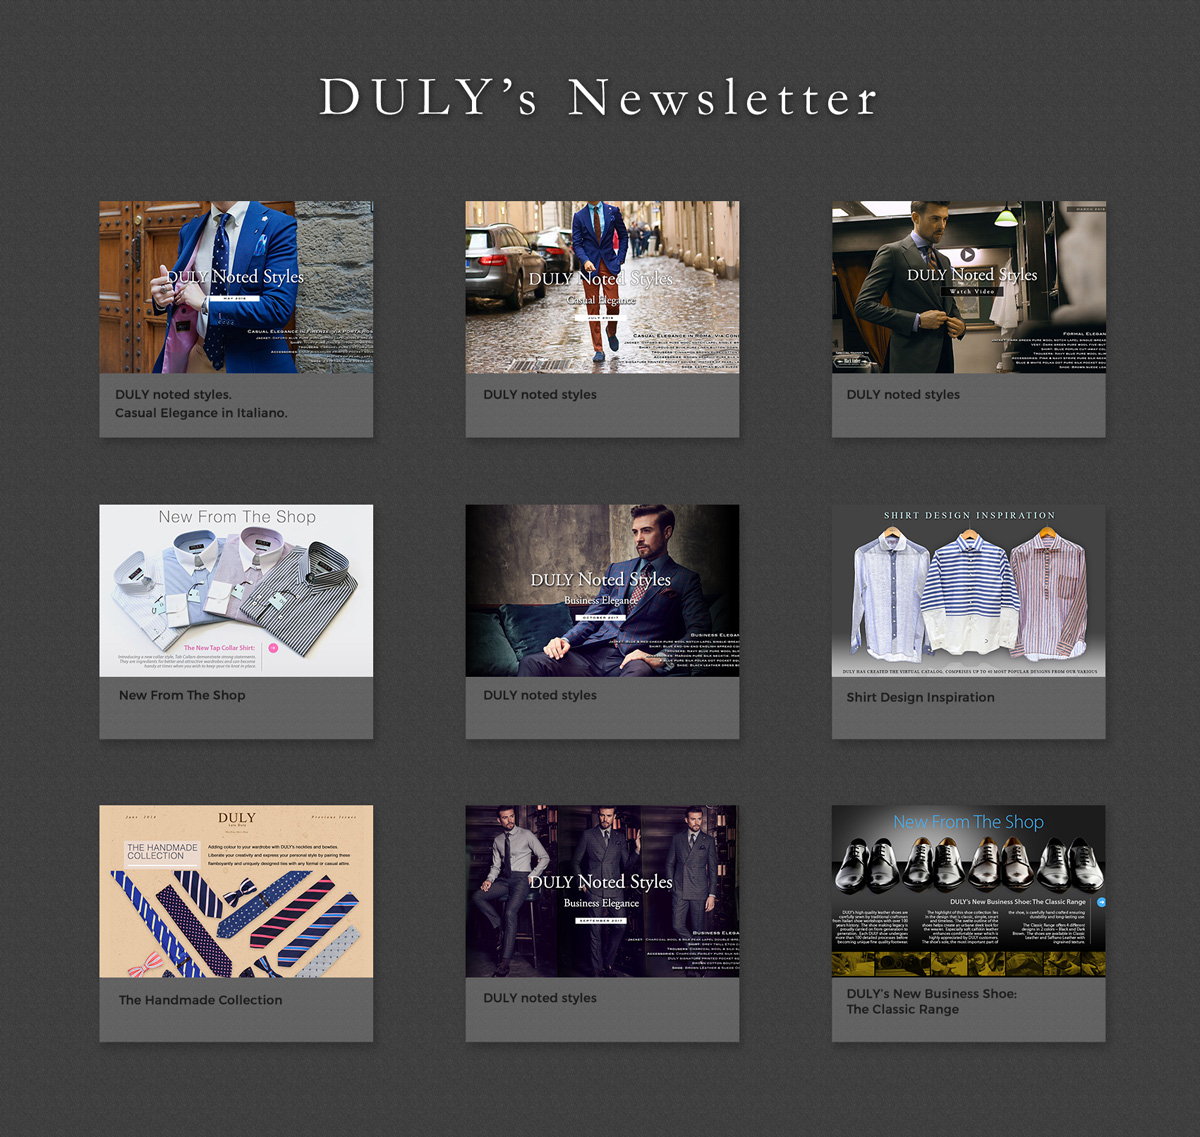 DULY’s Newsletter